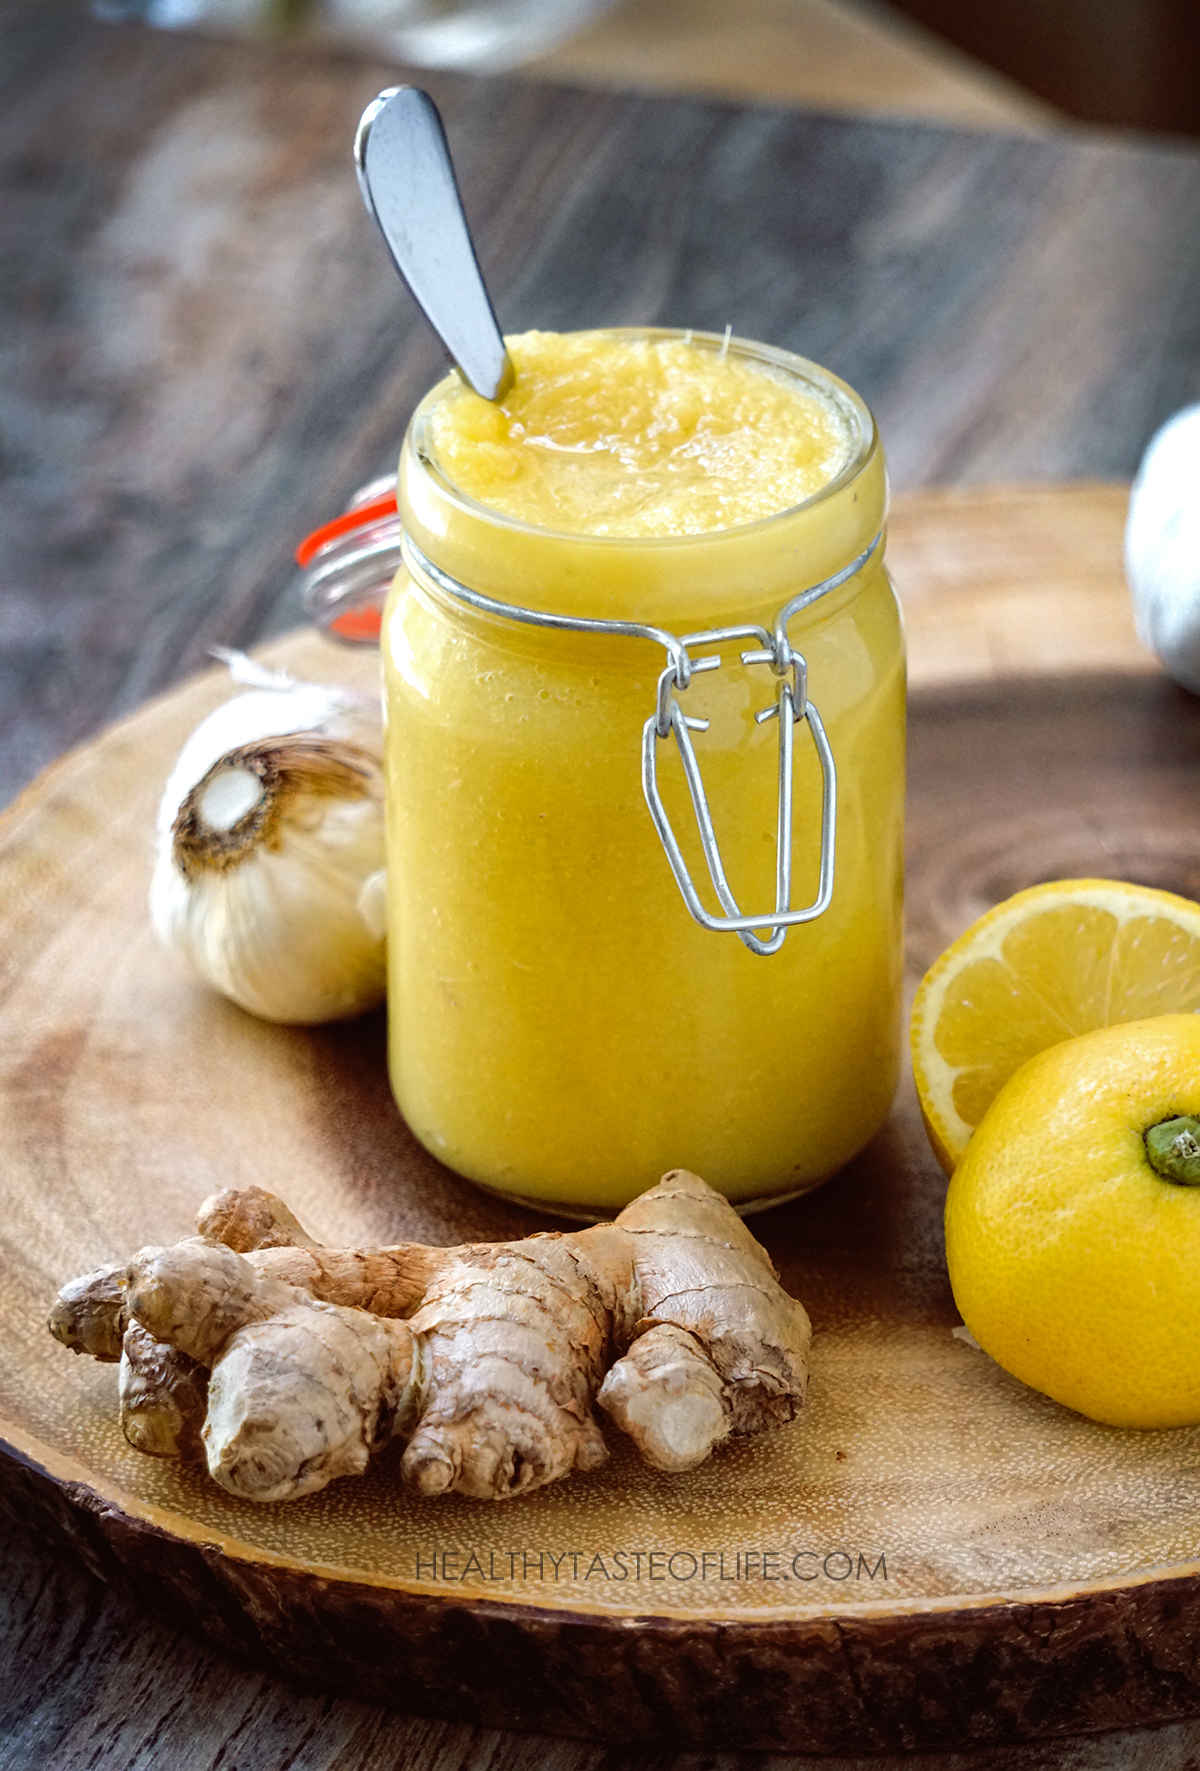 Homemade Immunity Boosting Recipe With Lemon Ginger Garlic And Honey. A natural home remedy:  immune booster recipe.